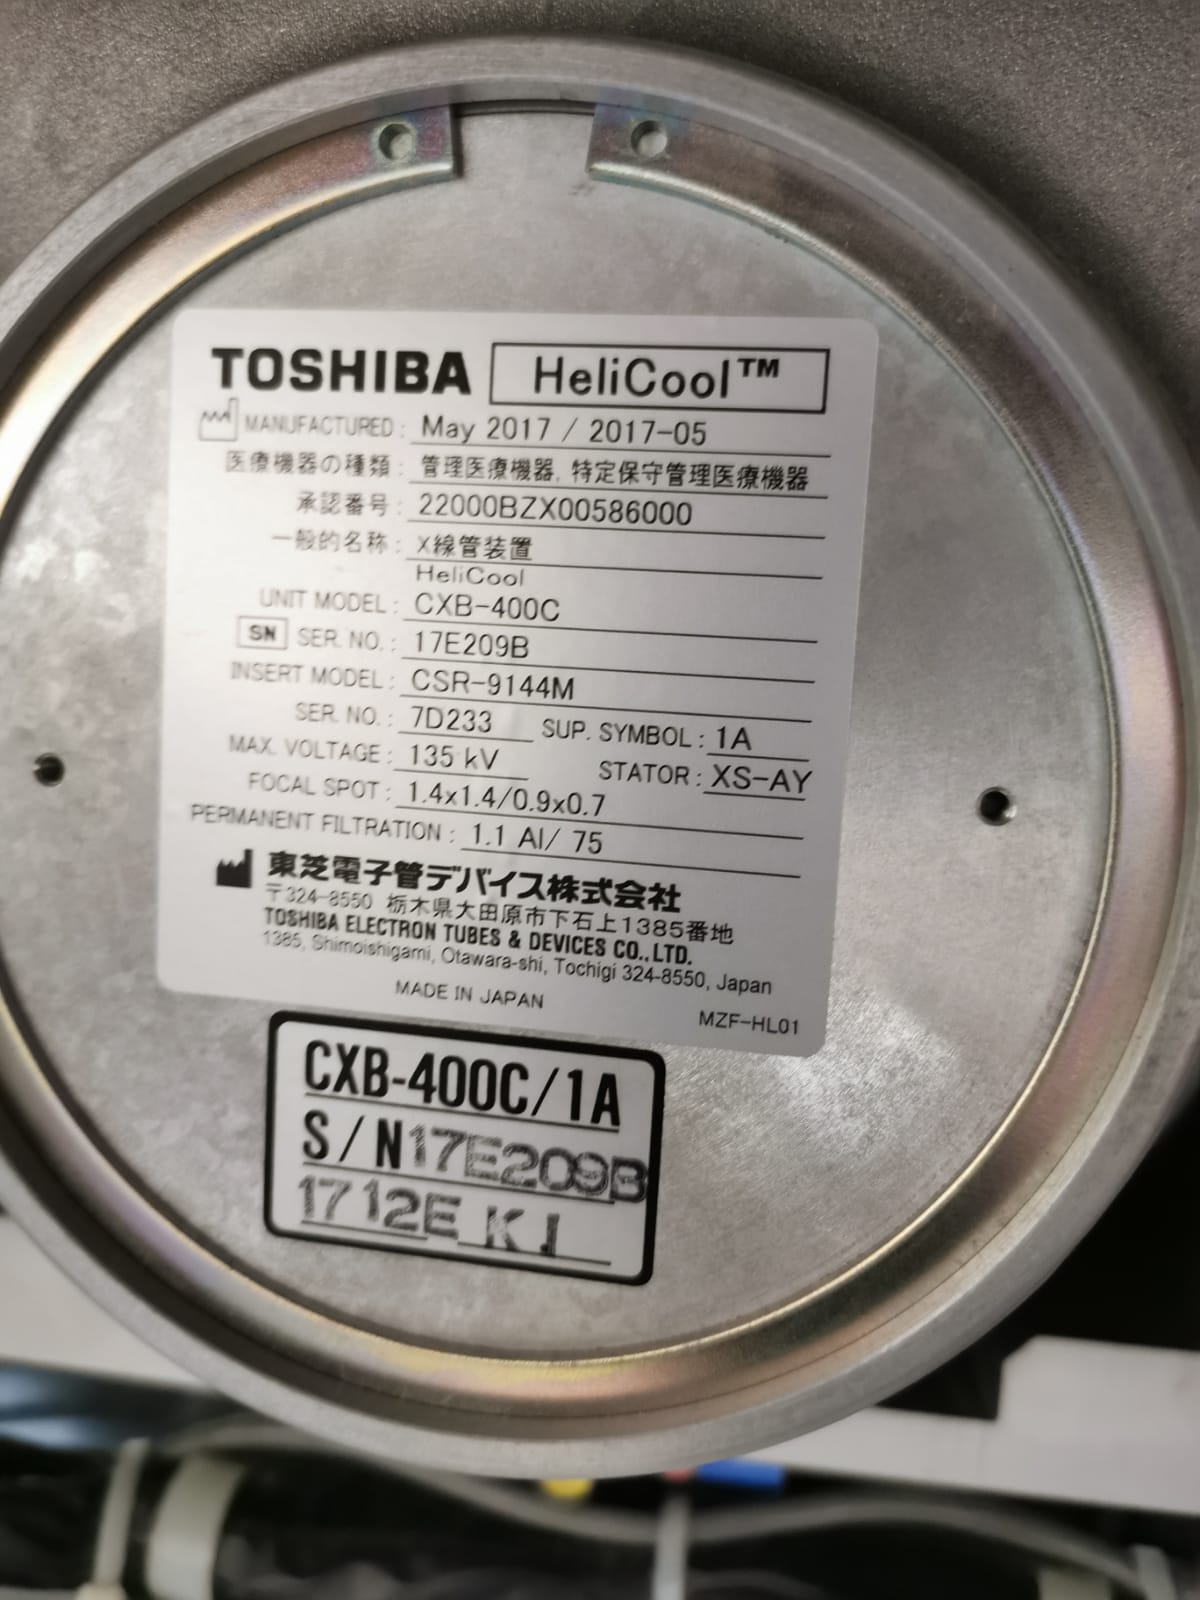 Toshiba Activion 16
Yom:2007
Tube usages is 2017 YOM) 279628 scan count at the time of de install.